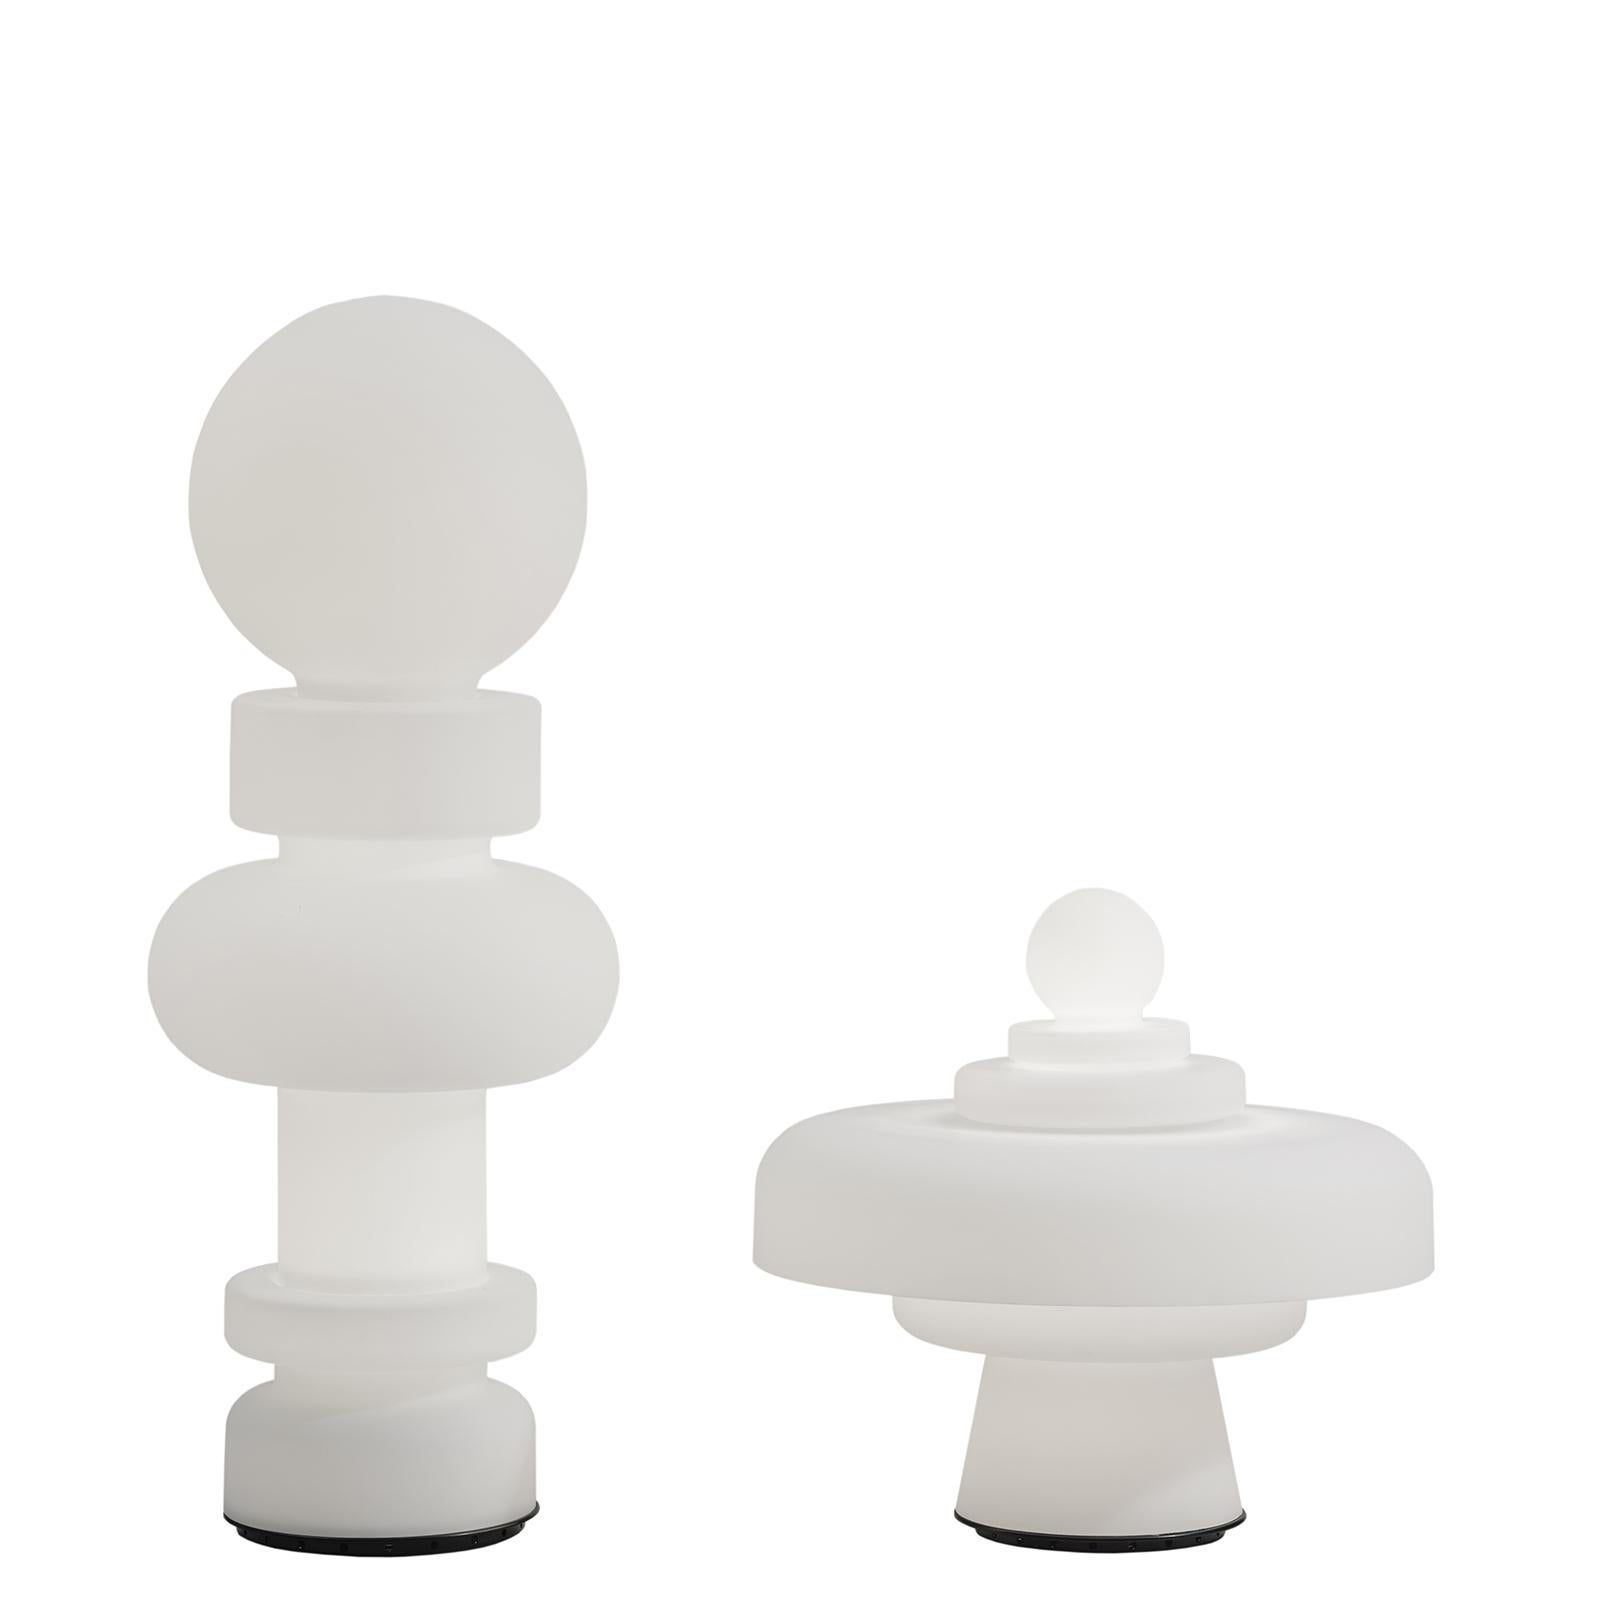 Inspired by the game of chess with their sinuous shapes, Re and Regina are the key characters of the chessboard. Their profiles stand out clearly in the white light diffused by opalescent glass. Real individuals, they play in pairs alternating